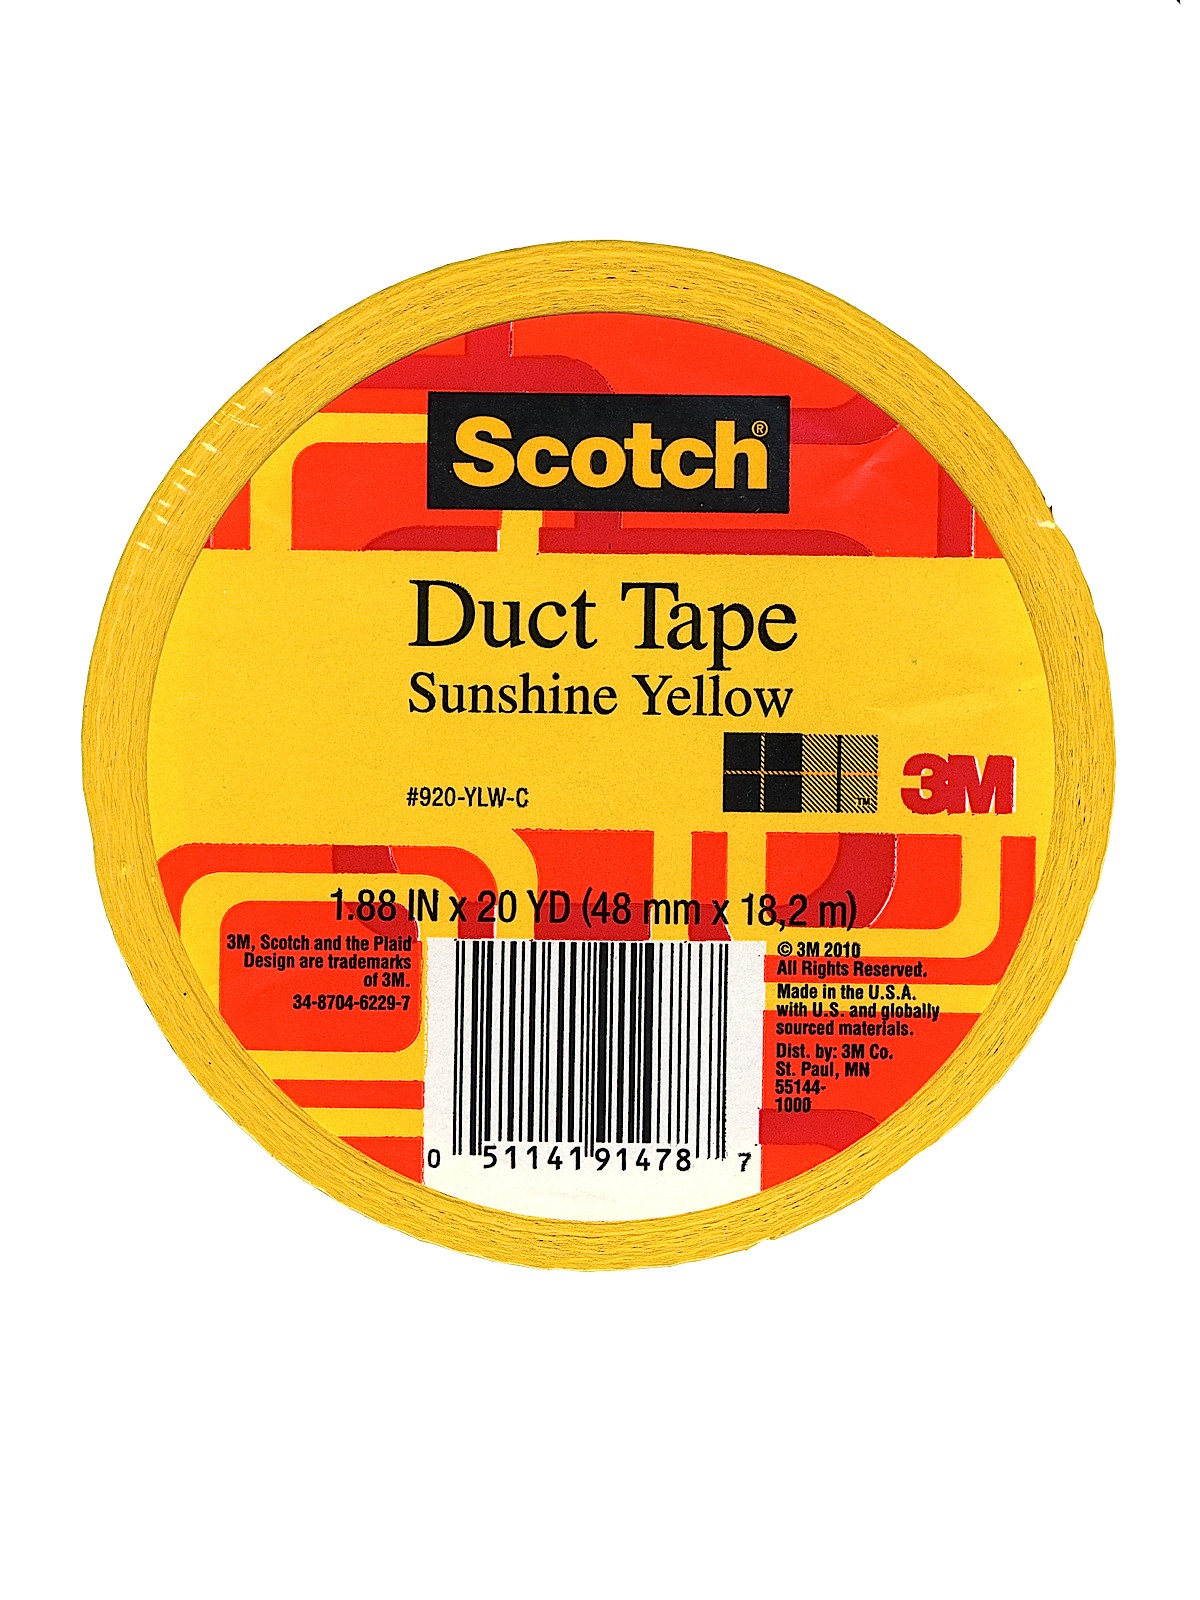 Colored Duct Tape Sunshine Yellow 1.88 In. X 20 Yd. Roll 920-YLW-C